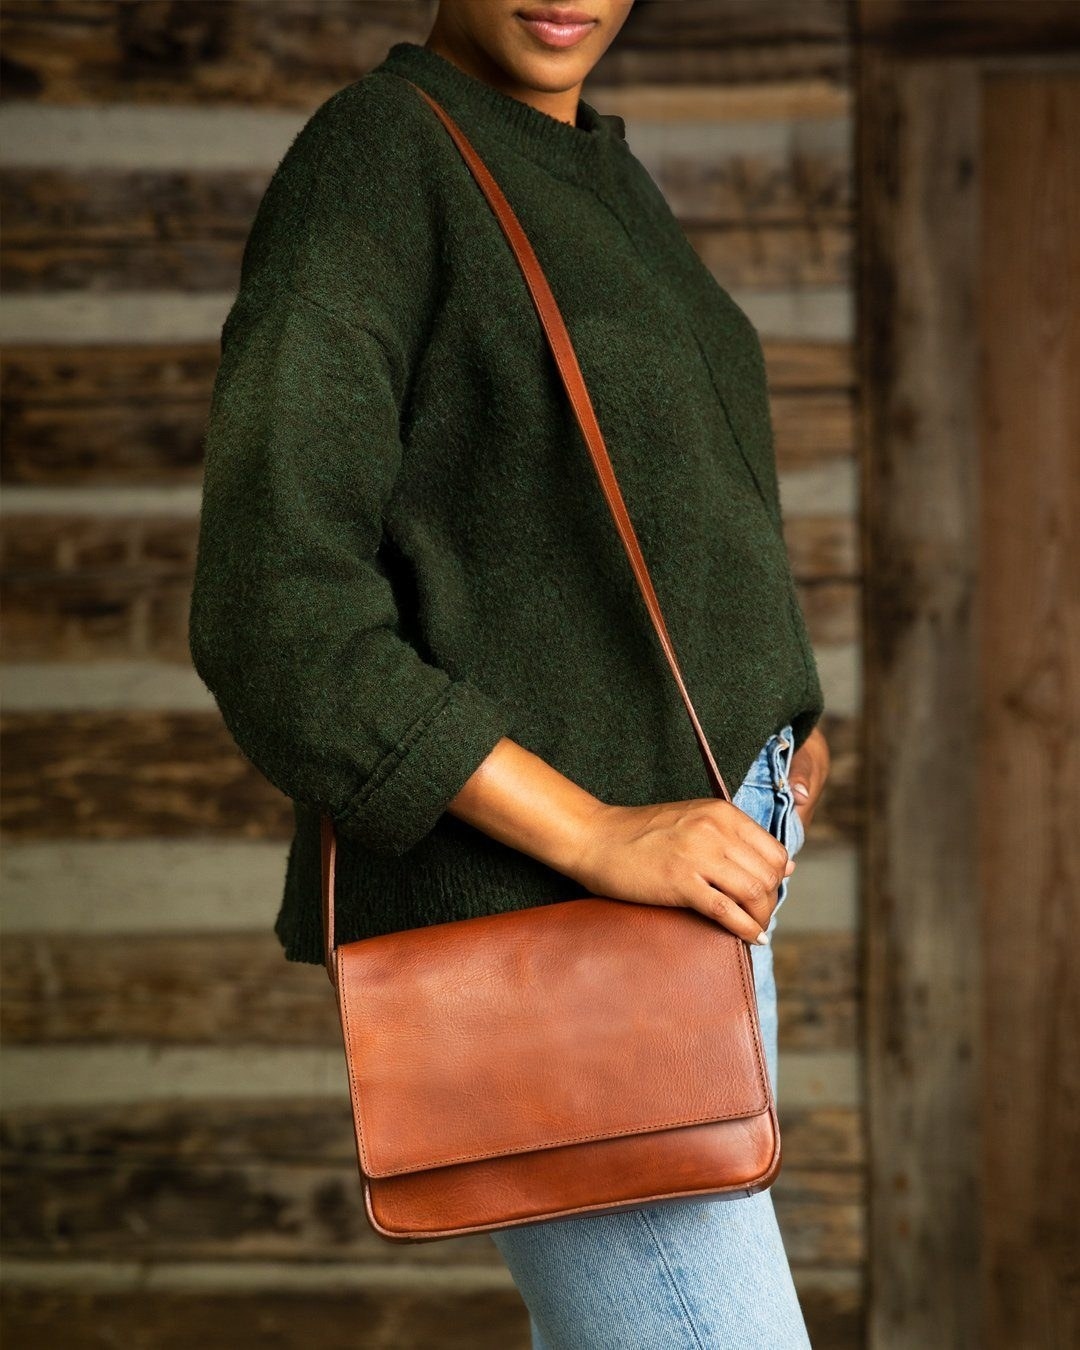 Model wearing cross-body purse with front flap over their shoulder in brown